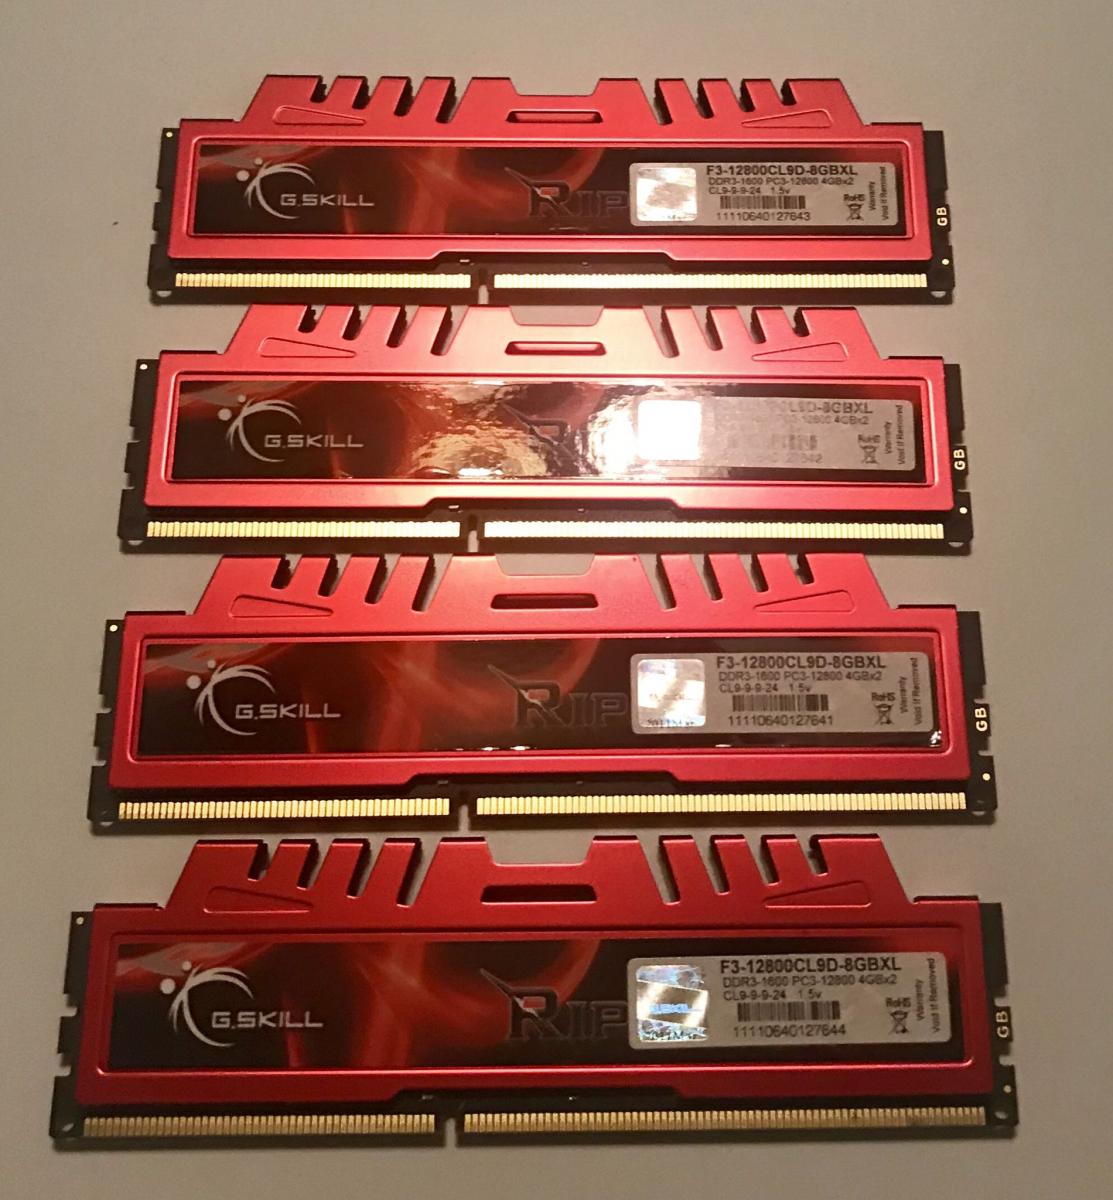 For sale (4) G.Skill 4gb 1600mhz RAM F3-12800CL9-8GBXL with cooler